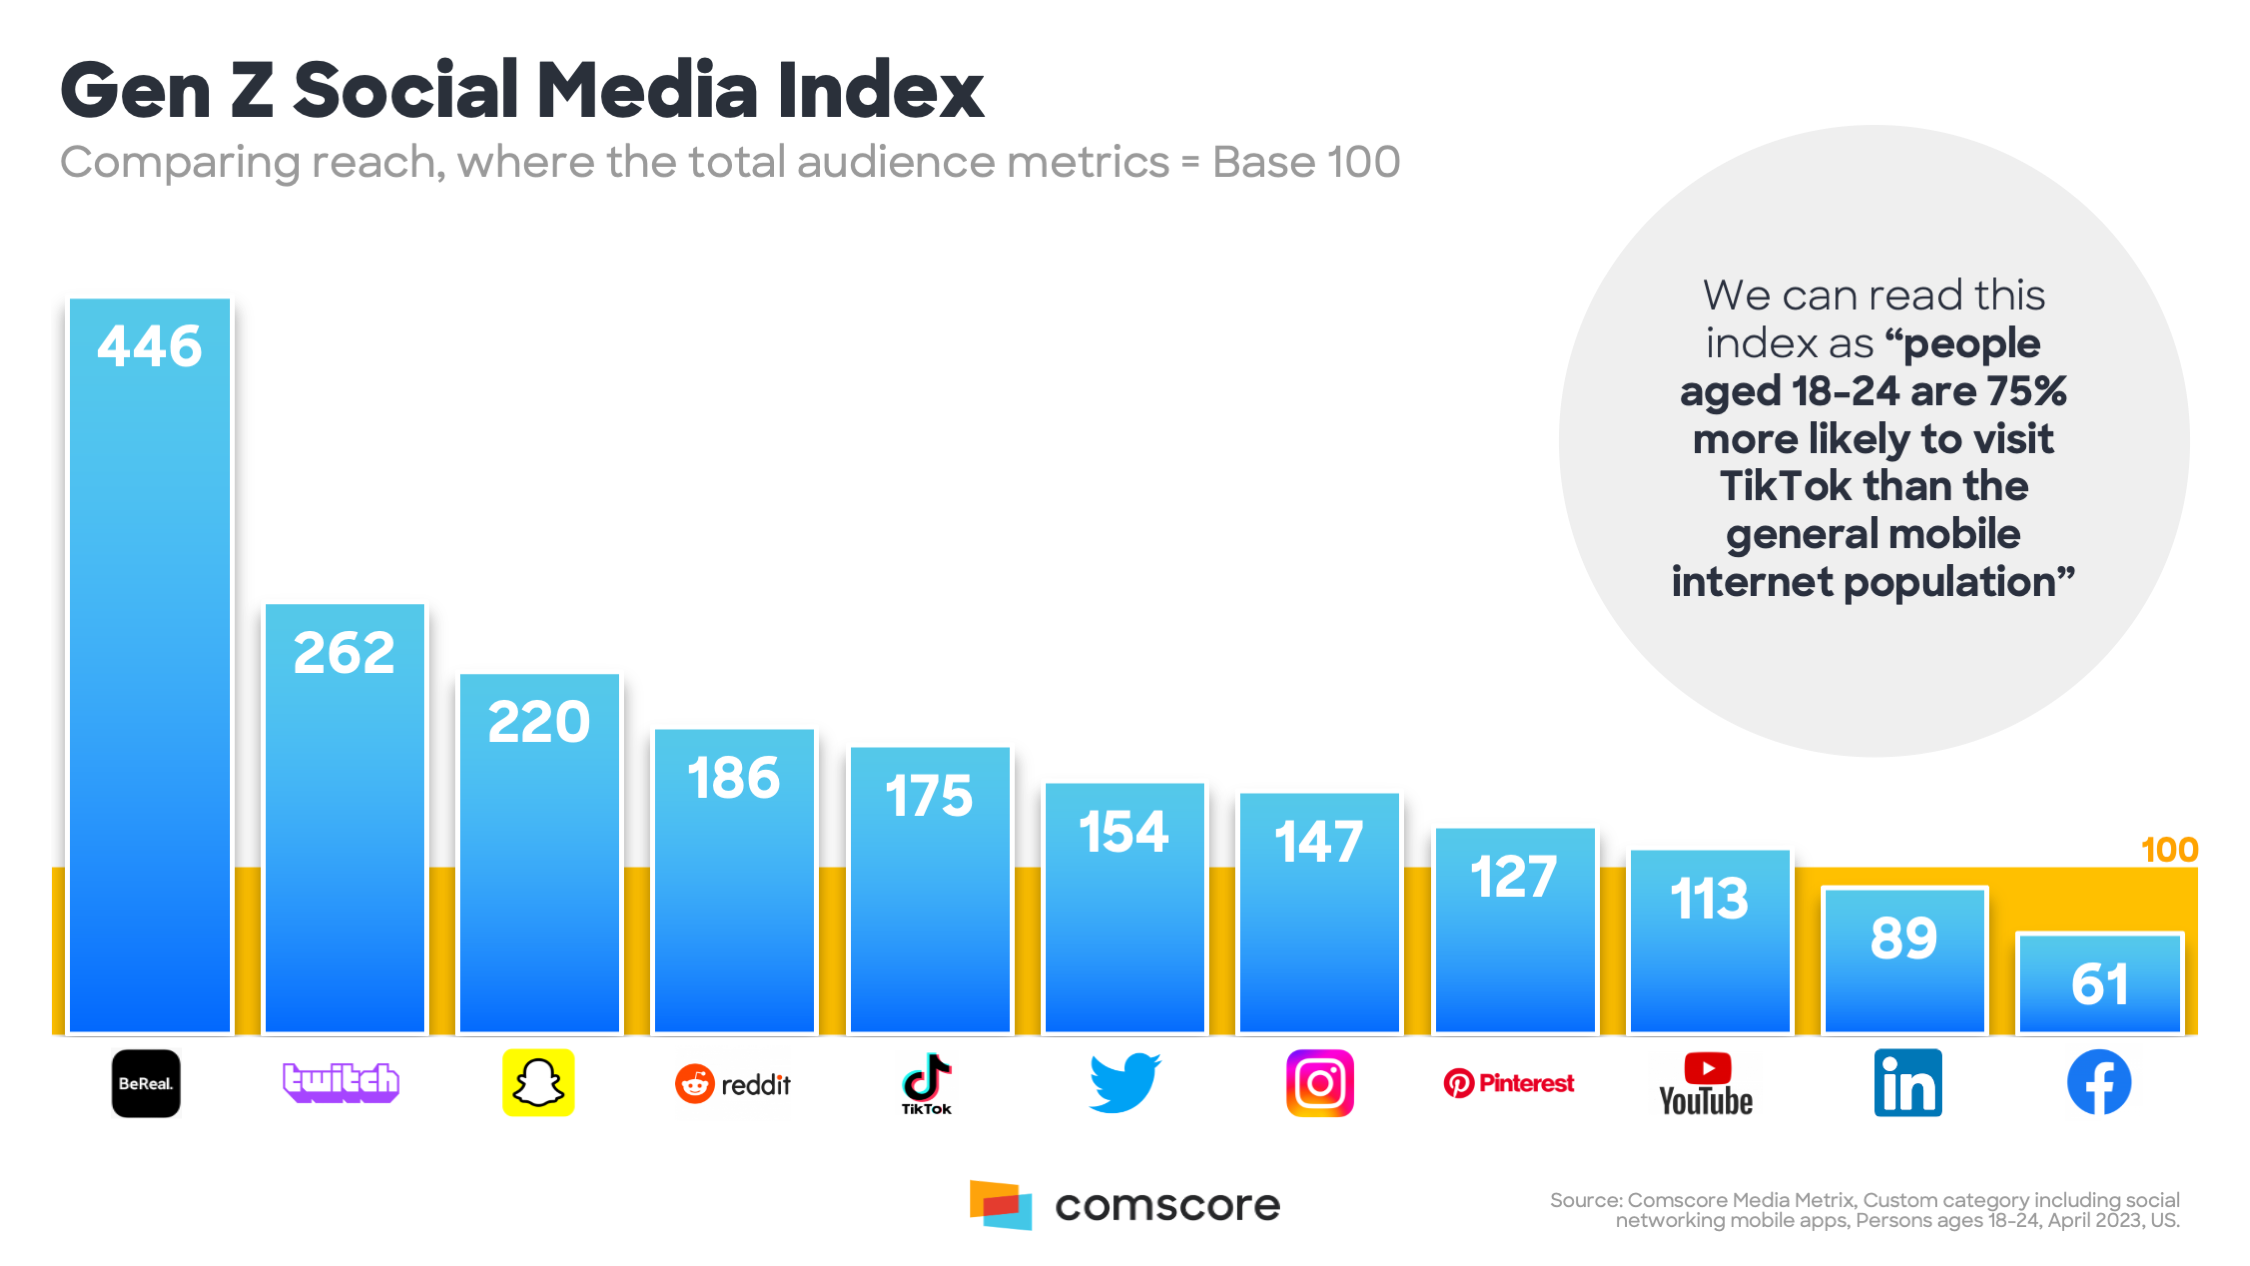 What are the most visited social media platforms among Gen Z?...